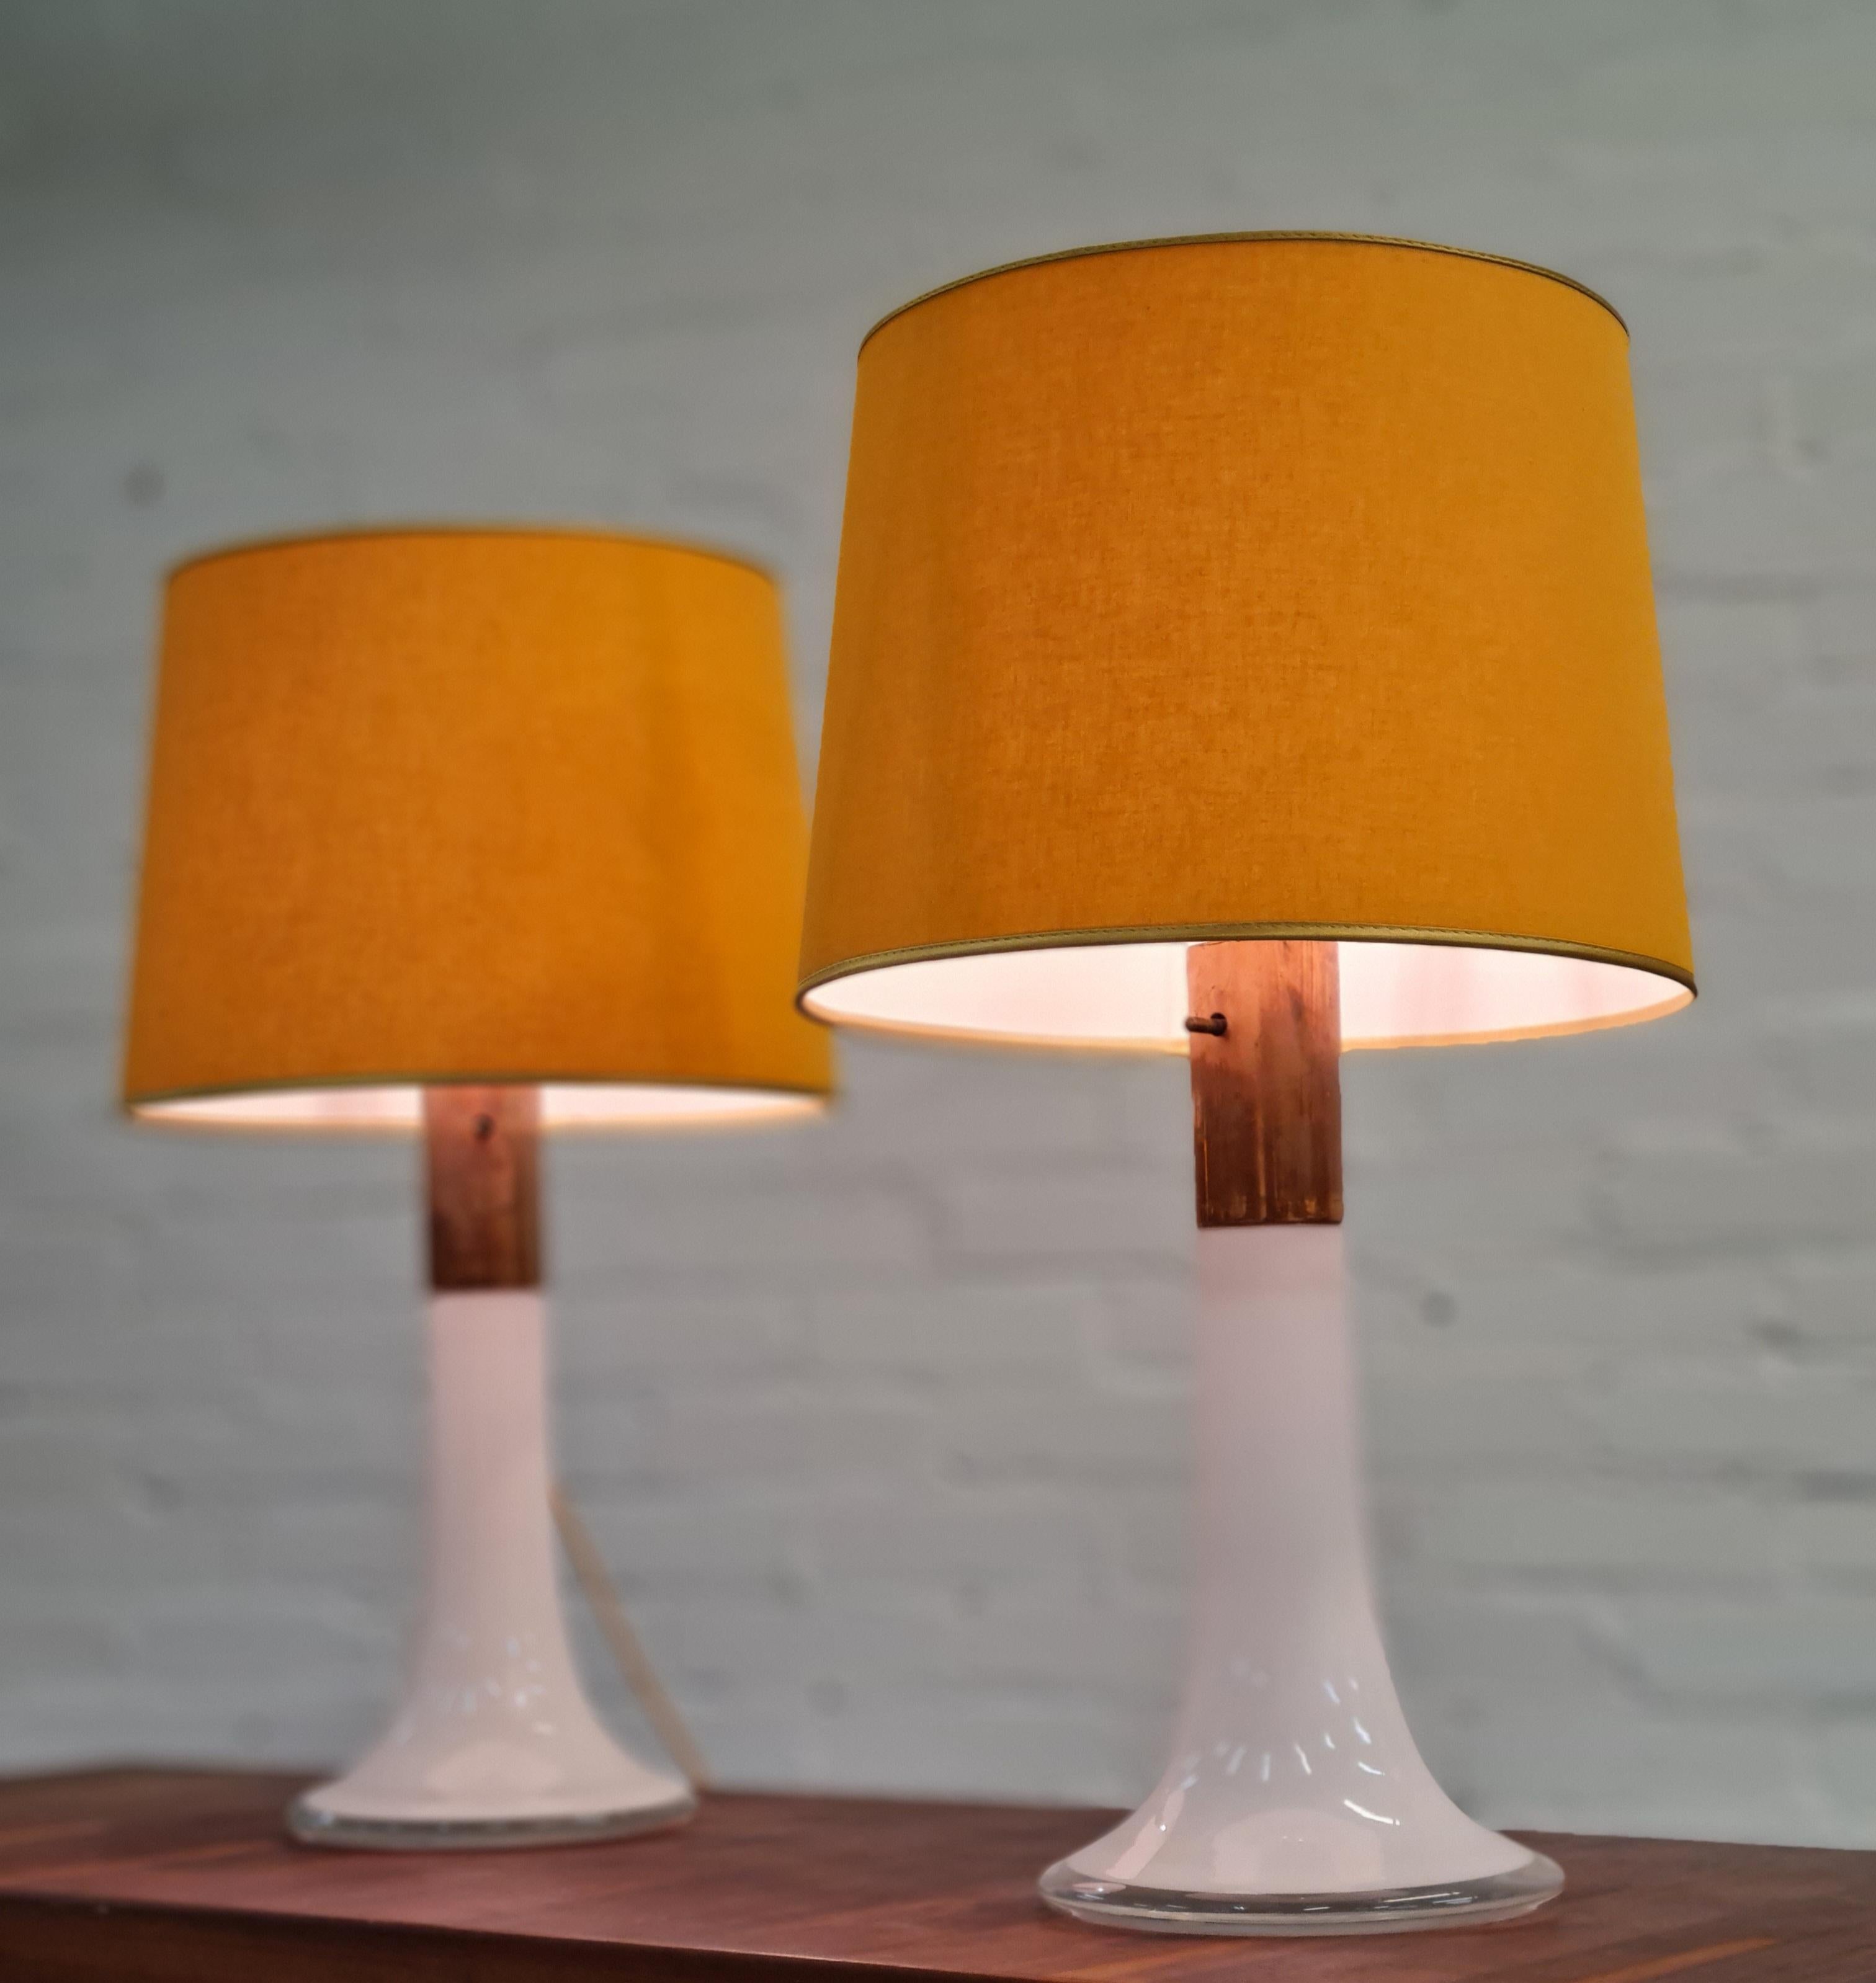 A beautiful pair of table lamps in original condition with a beautiful patina and shades redone on original shade frames and a similar fabric as the original. Designed by the renowned Lisa Johansson-Pape this model is one of the most recognized